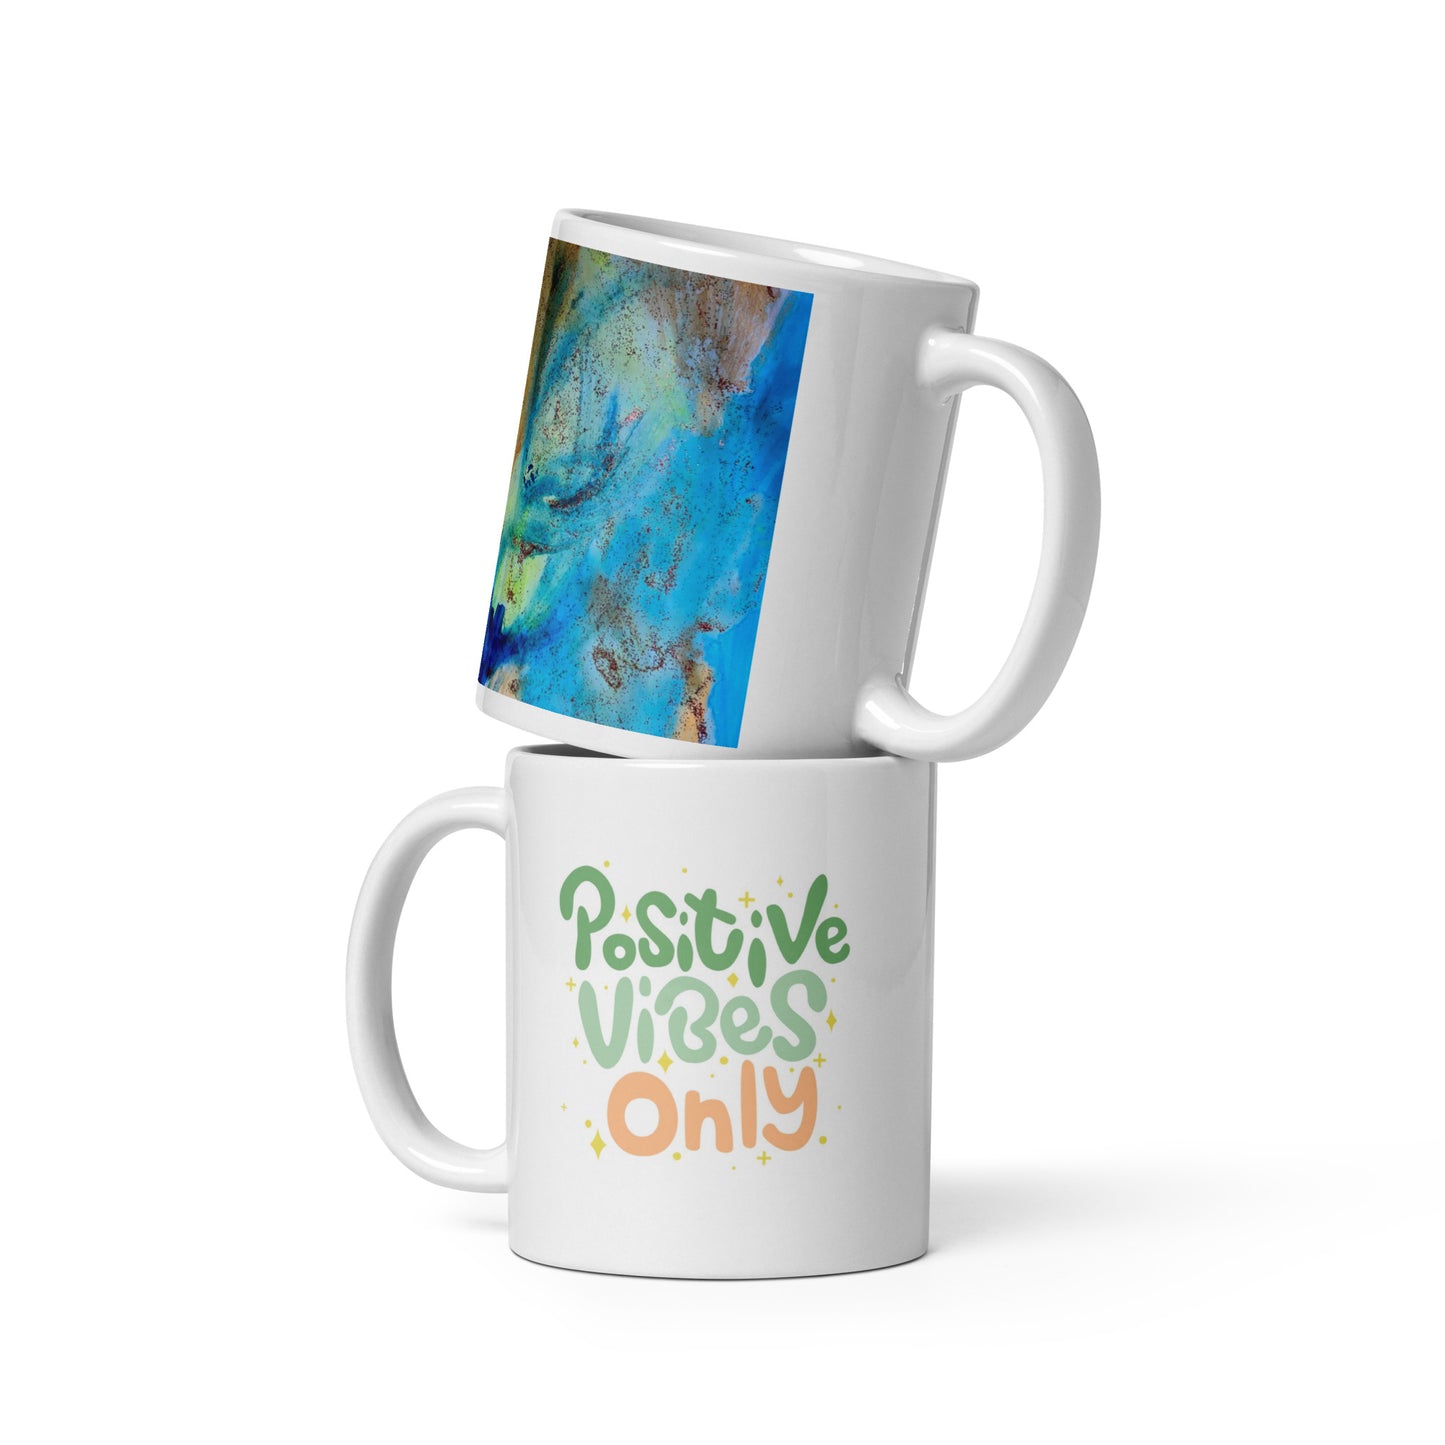 Custom Mug with Photo & Text | Personalized Gift for Her, Him, Mom, Dad | Great for Office, Anniversary, Birthday and Special Occasions